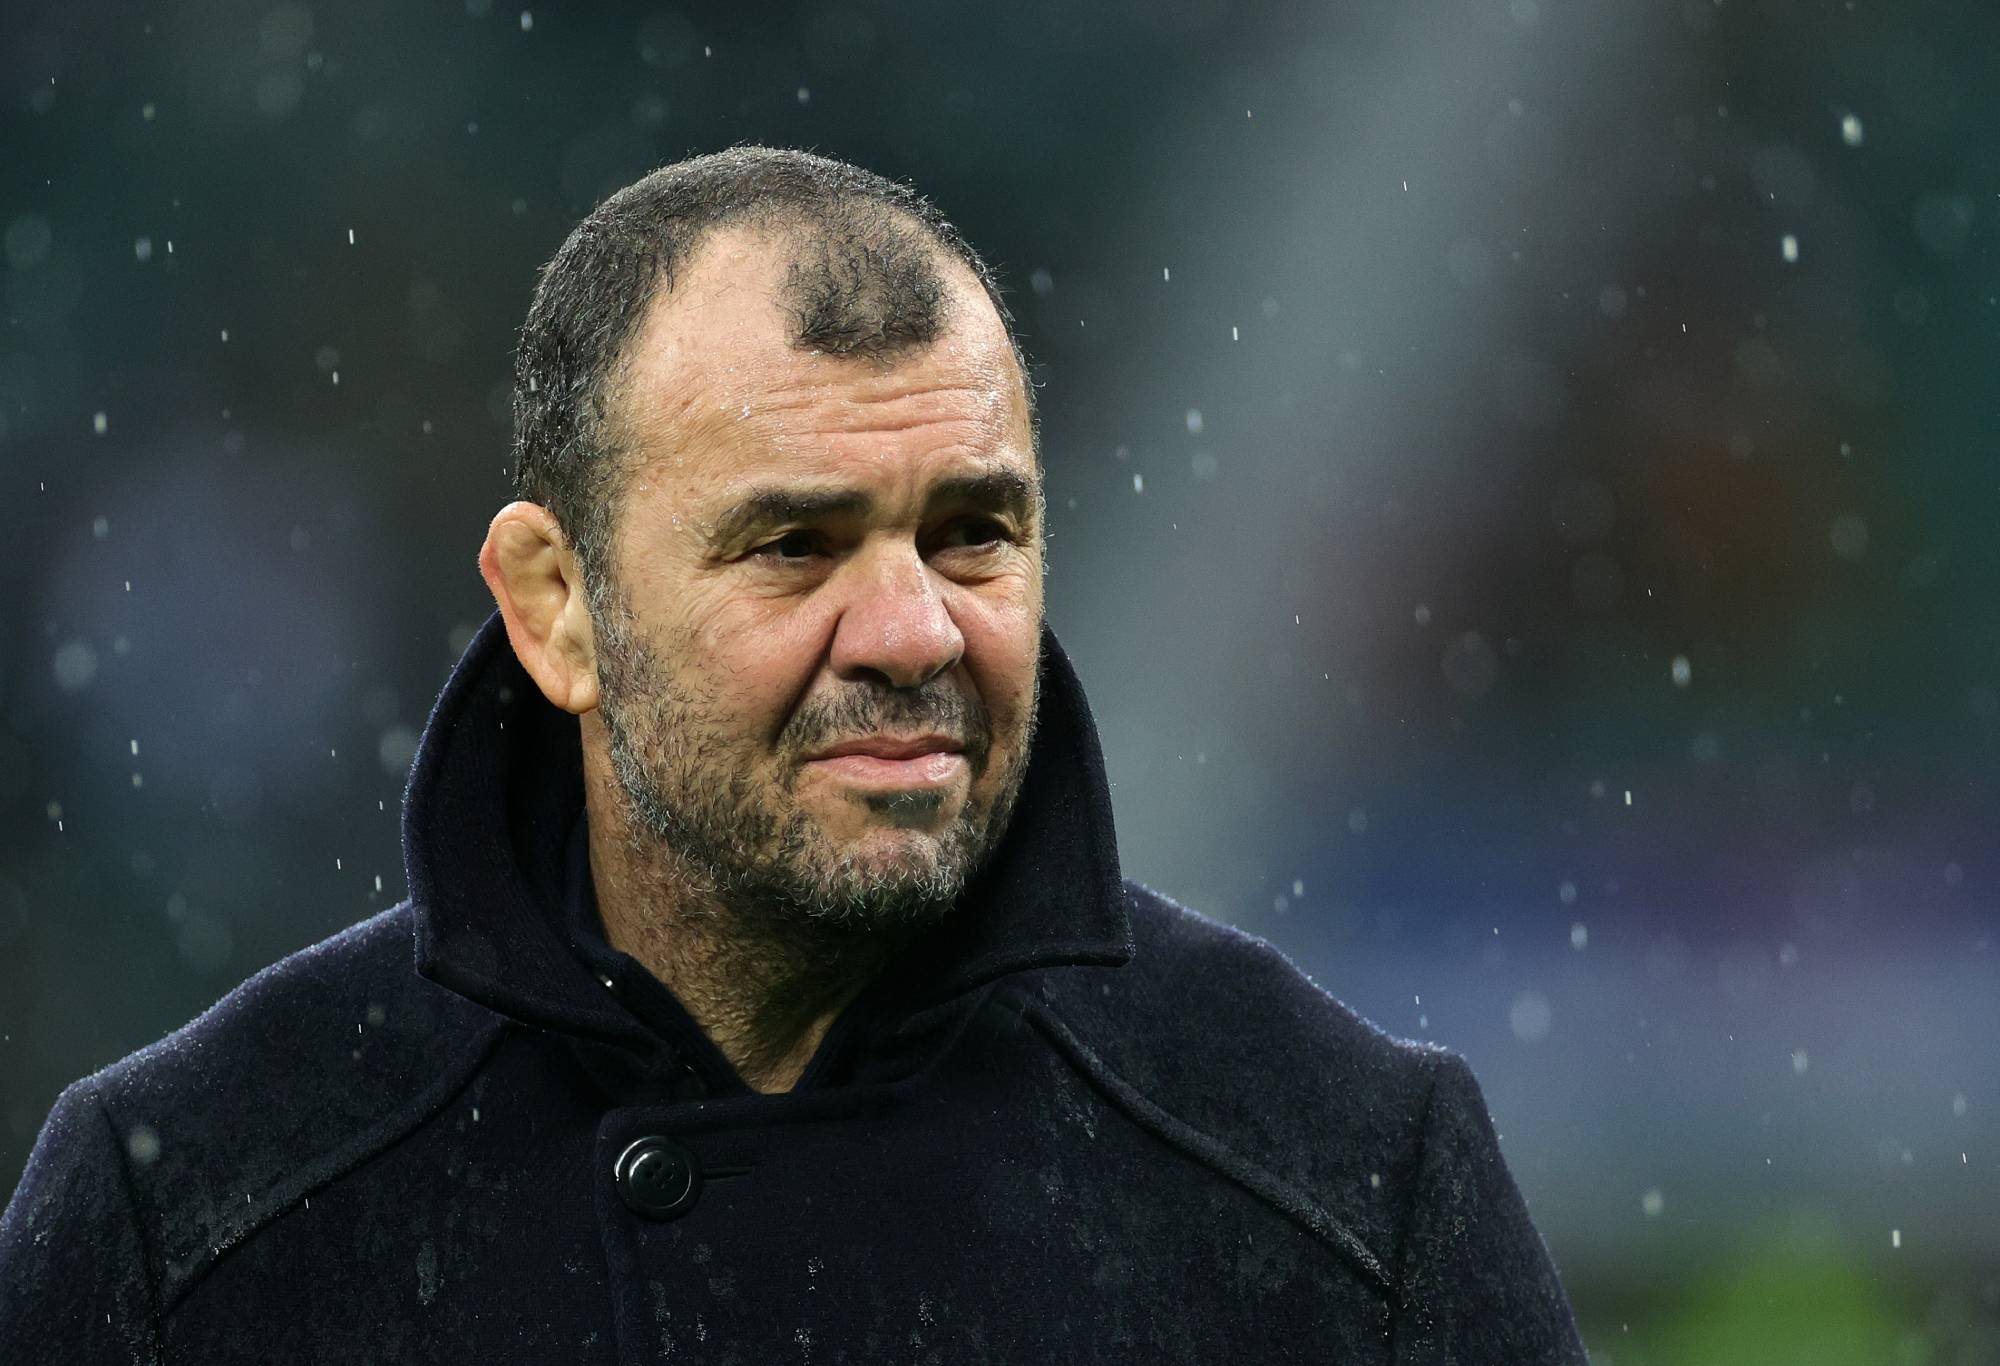 The big step back Cheika needs to take if he ever wants to snare an NRL coaching gig